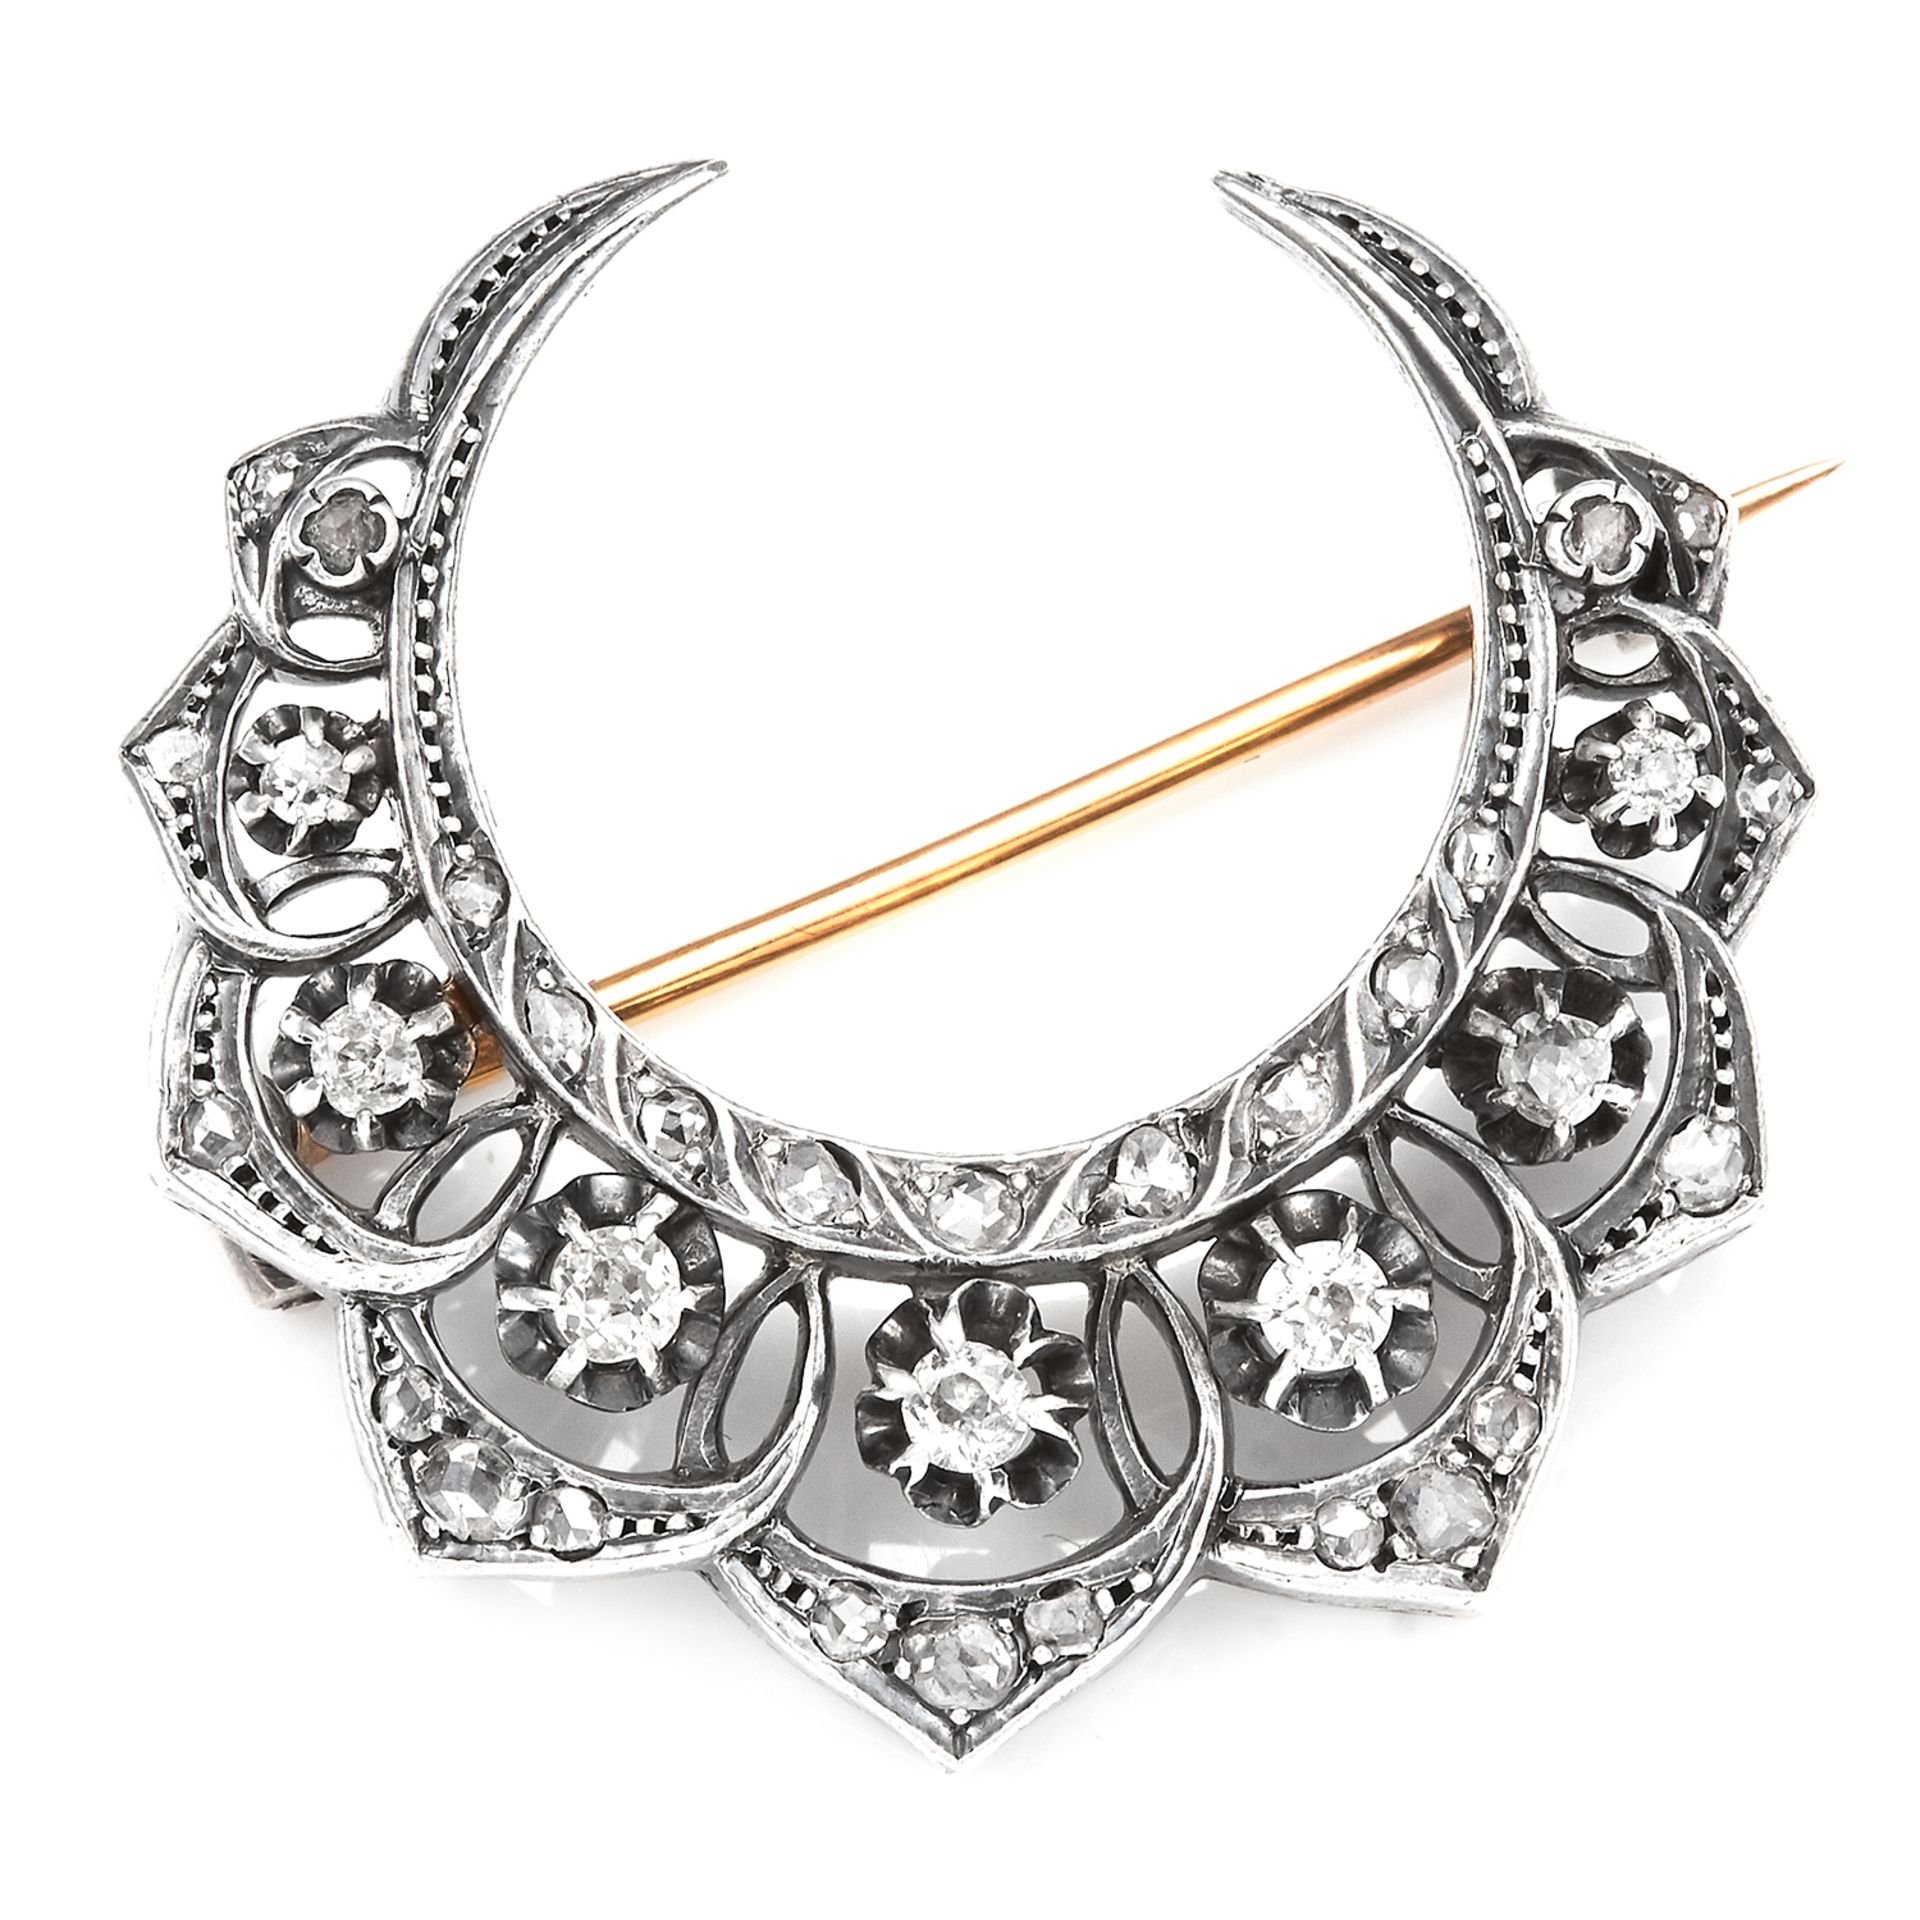 AN ANTIQUE DIAMOND CRESCENT BROOCH in 18ct yellow gold and silver, designed as a crescent jewelled